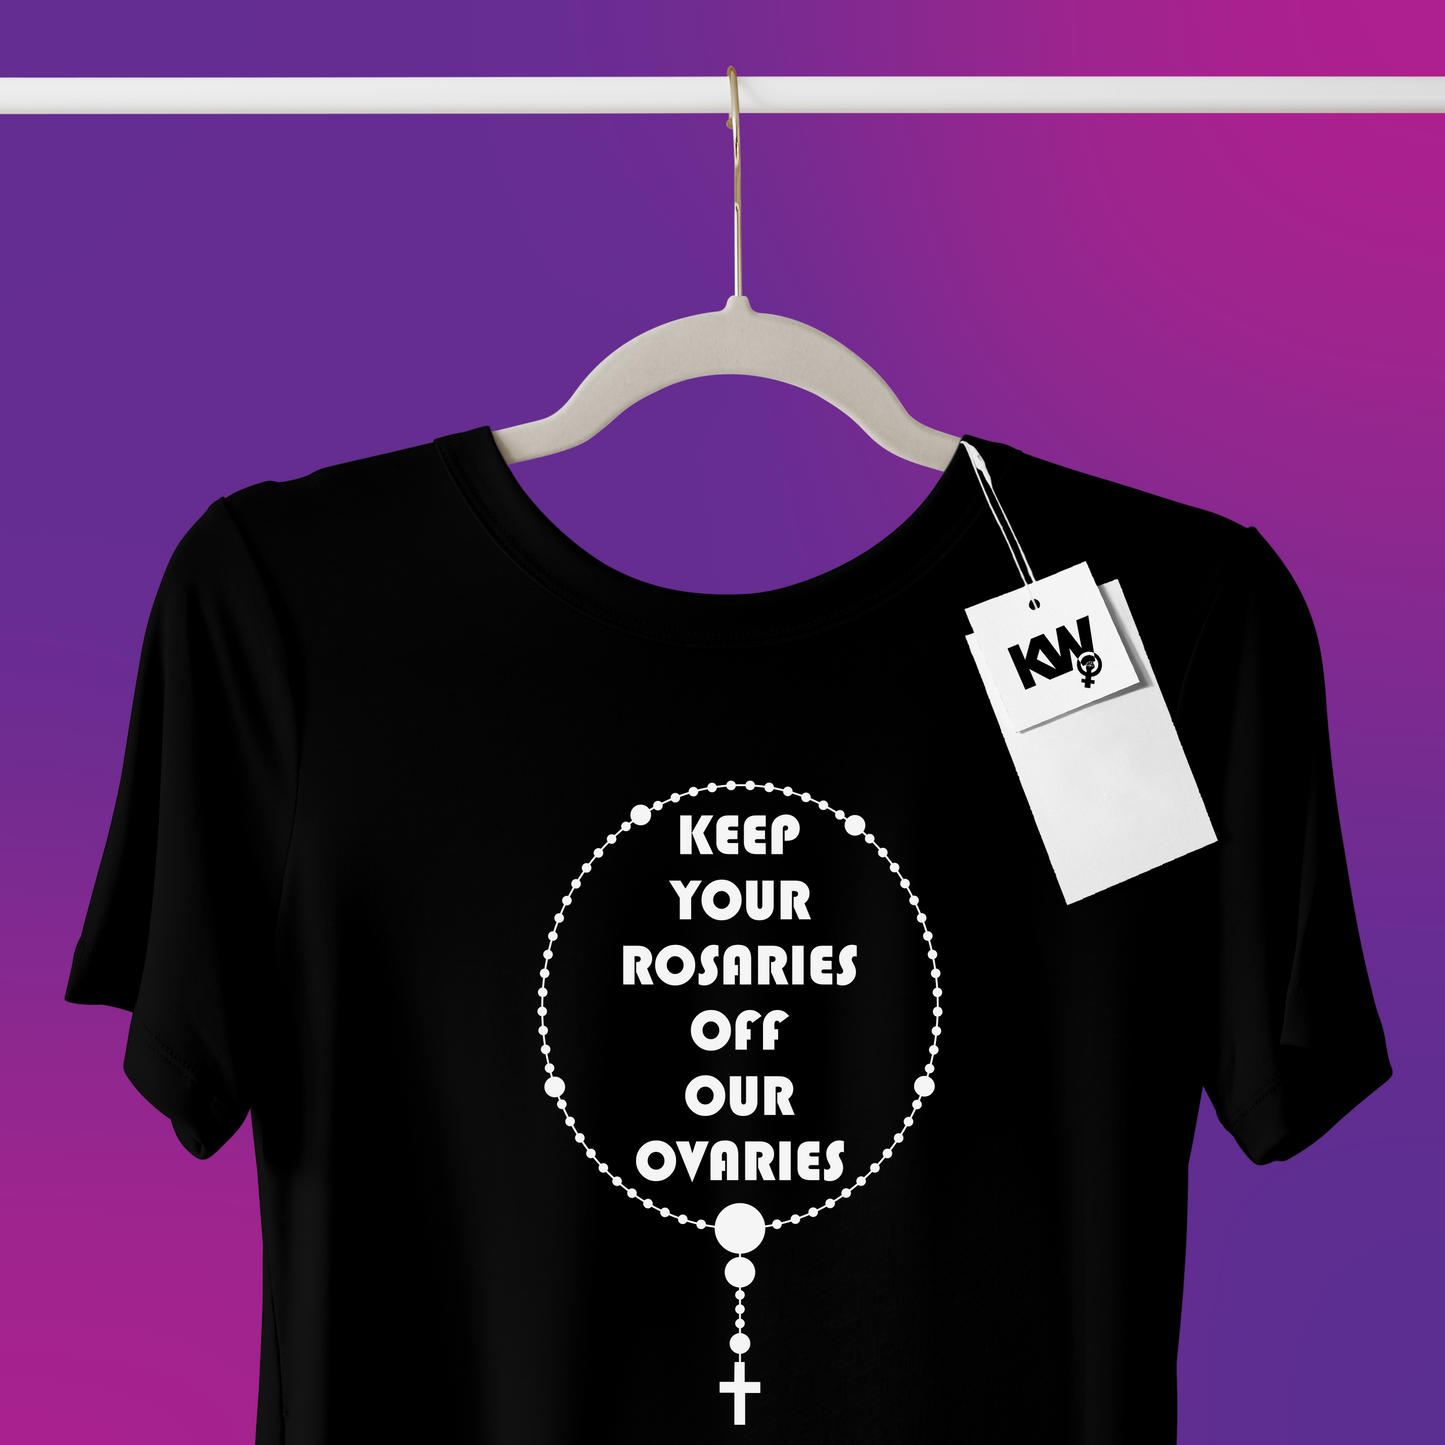 T-Shirt with "KEEP YOUR ROSARIES OFF OUR OVARIES" hand screenprint.